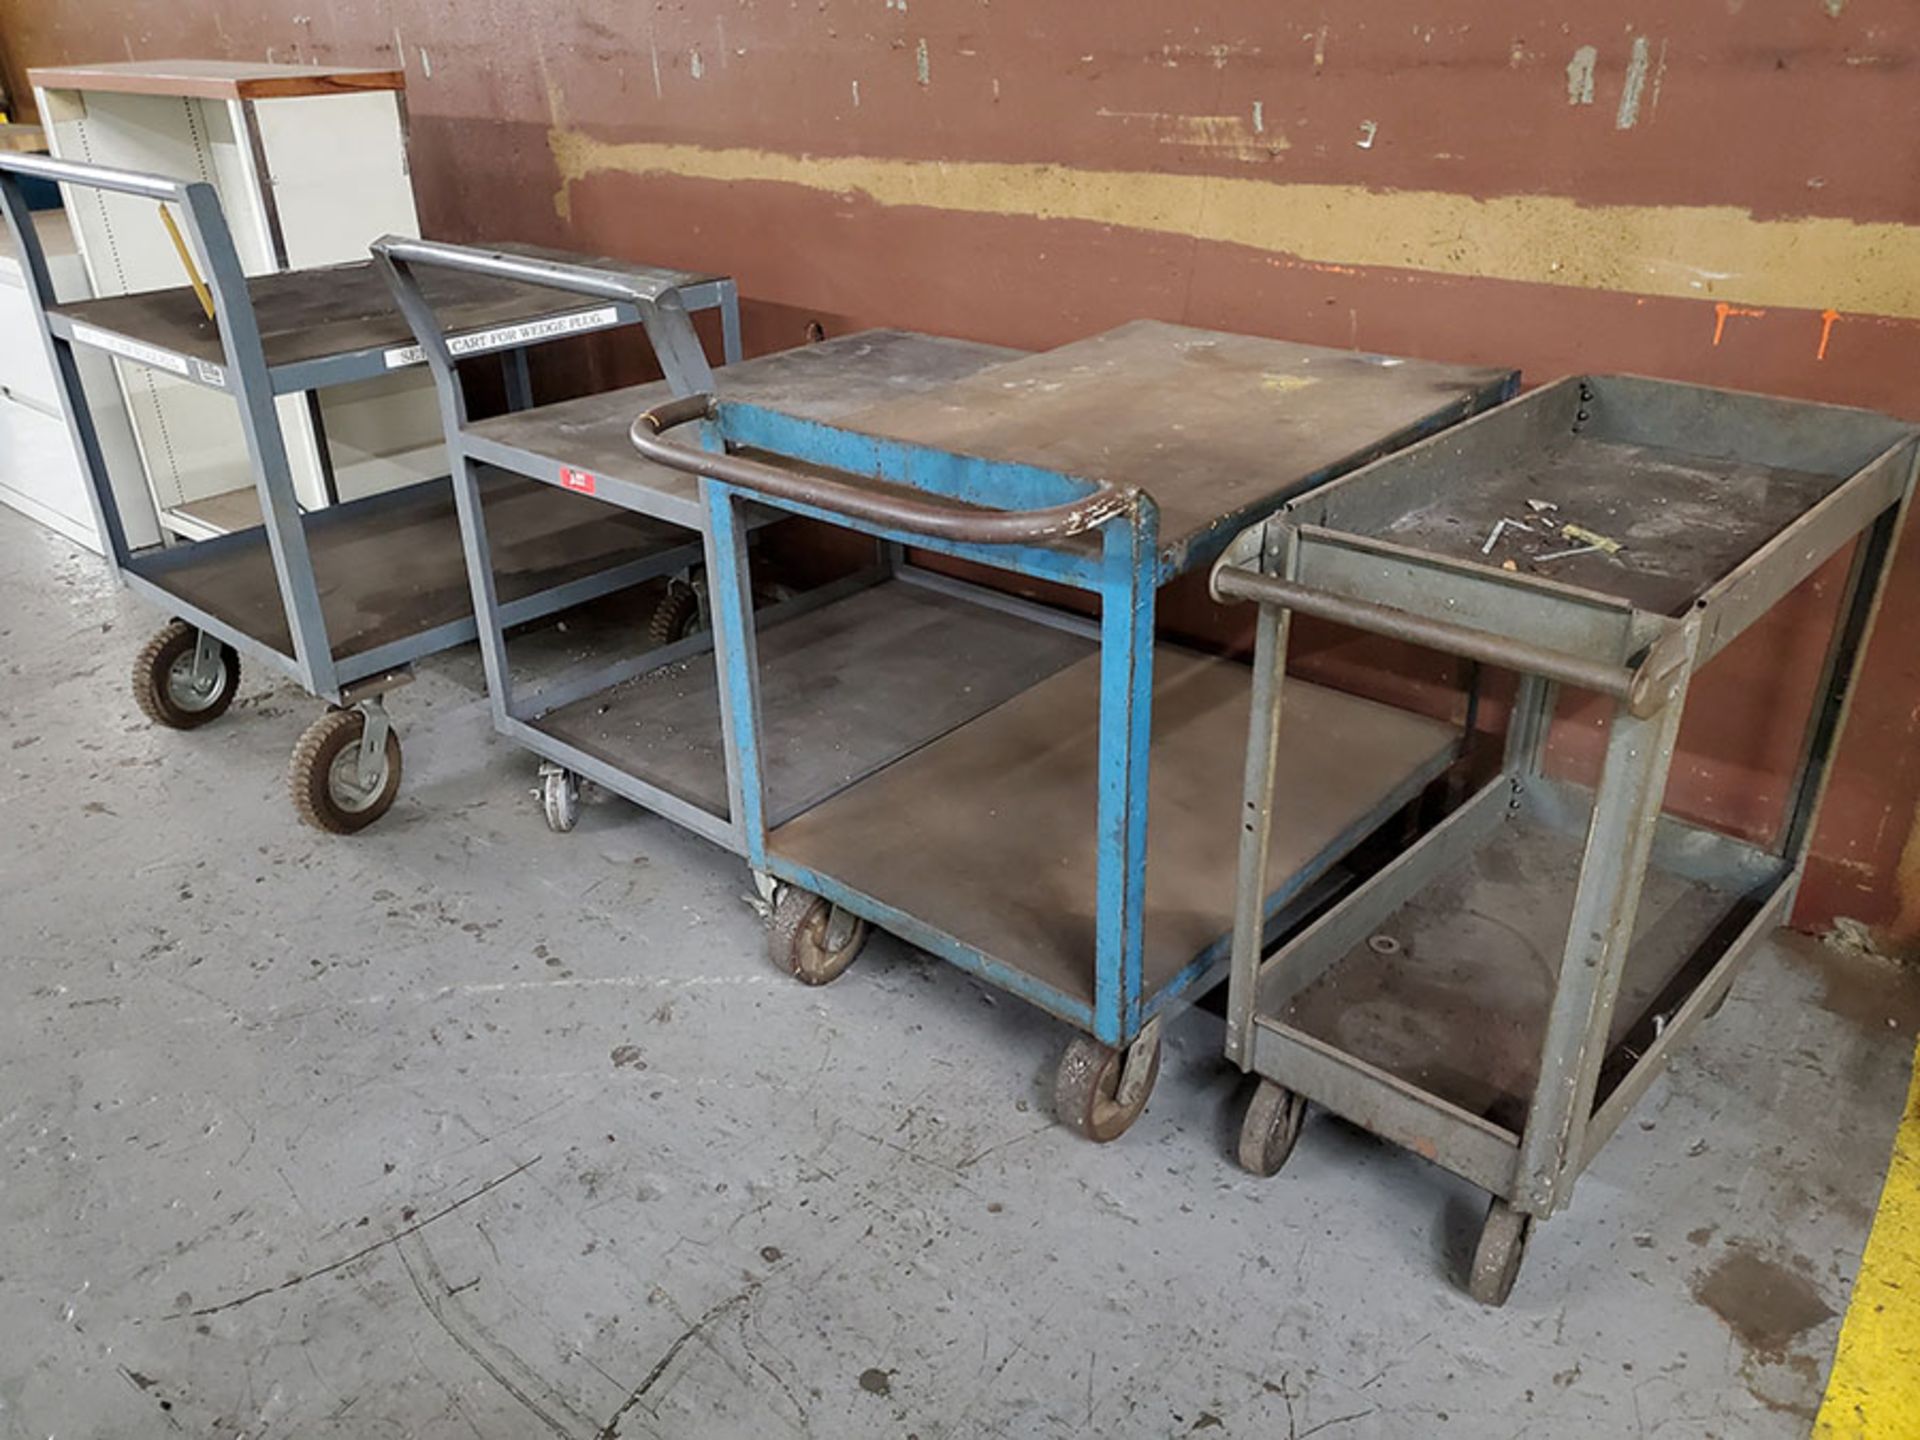 (10+) METAL AND PLASTIC SHOP CARTS, ASSORTED SIZES - Image 5 of 9